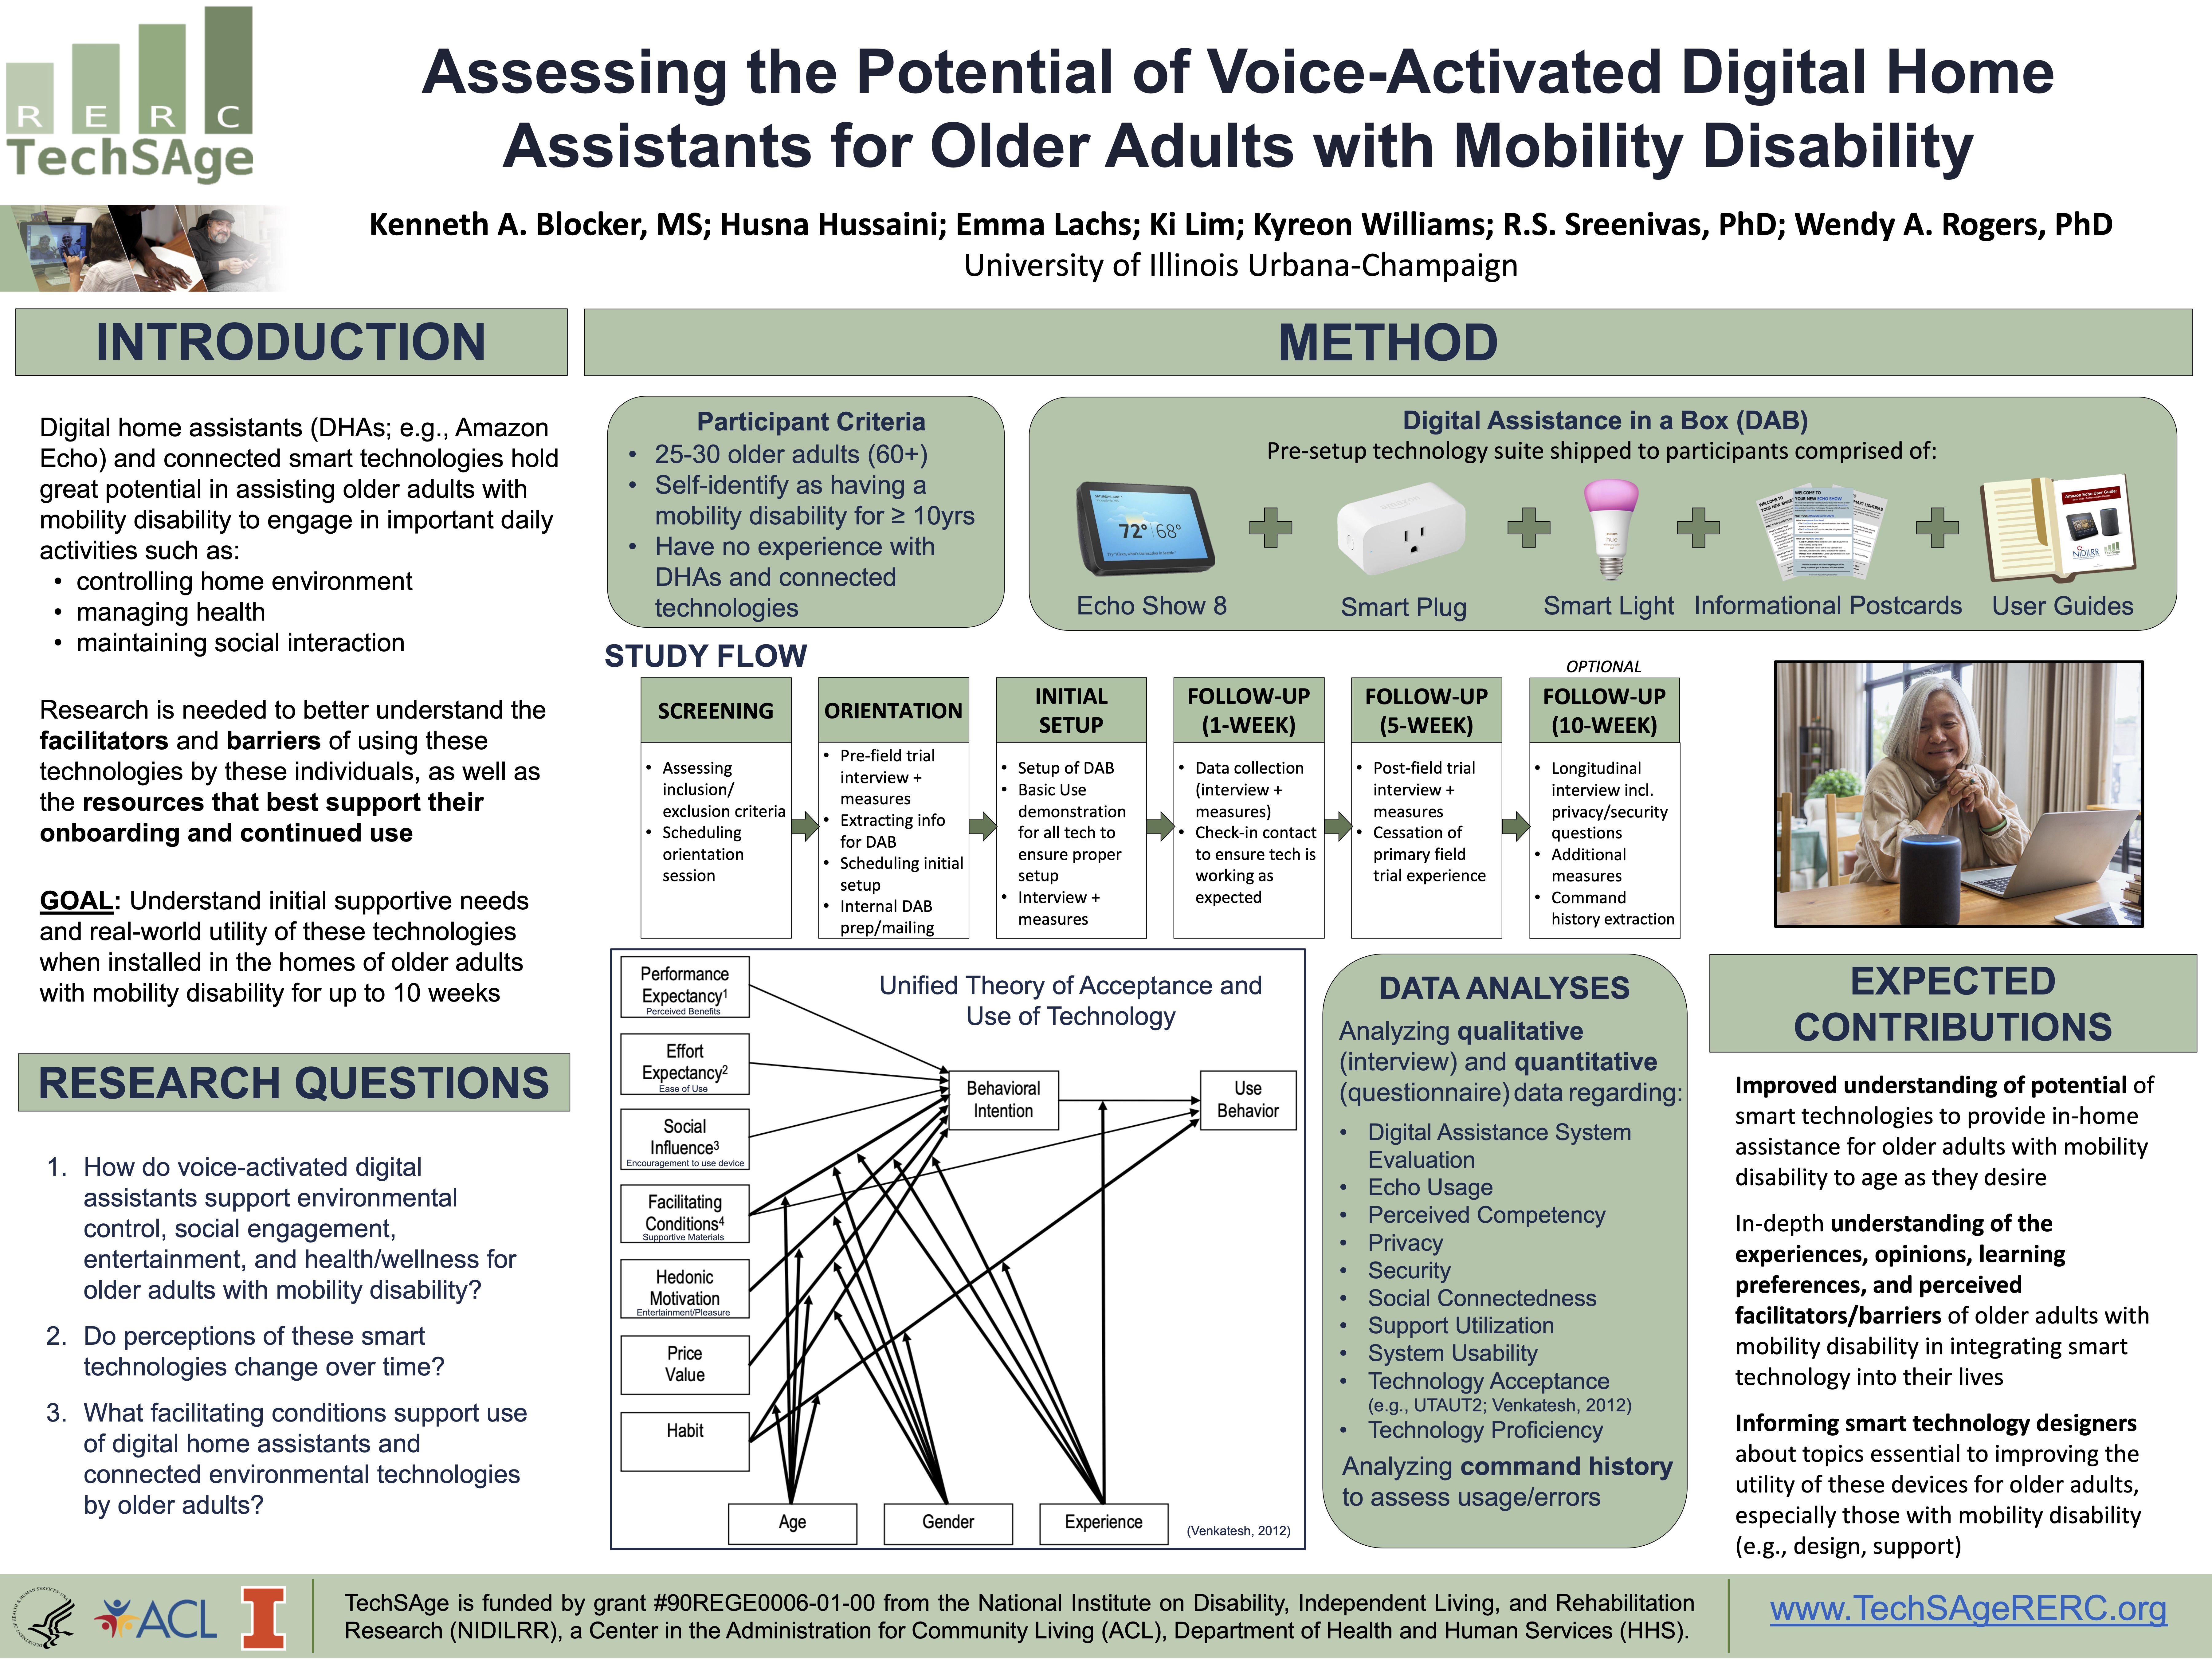 Screenshot of poster "Assessing the Potential of Voice-Activated Digital Home Assistants for Older Adults with Mobility Disability"